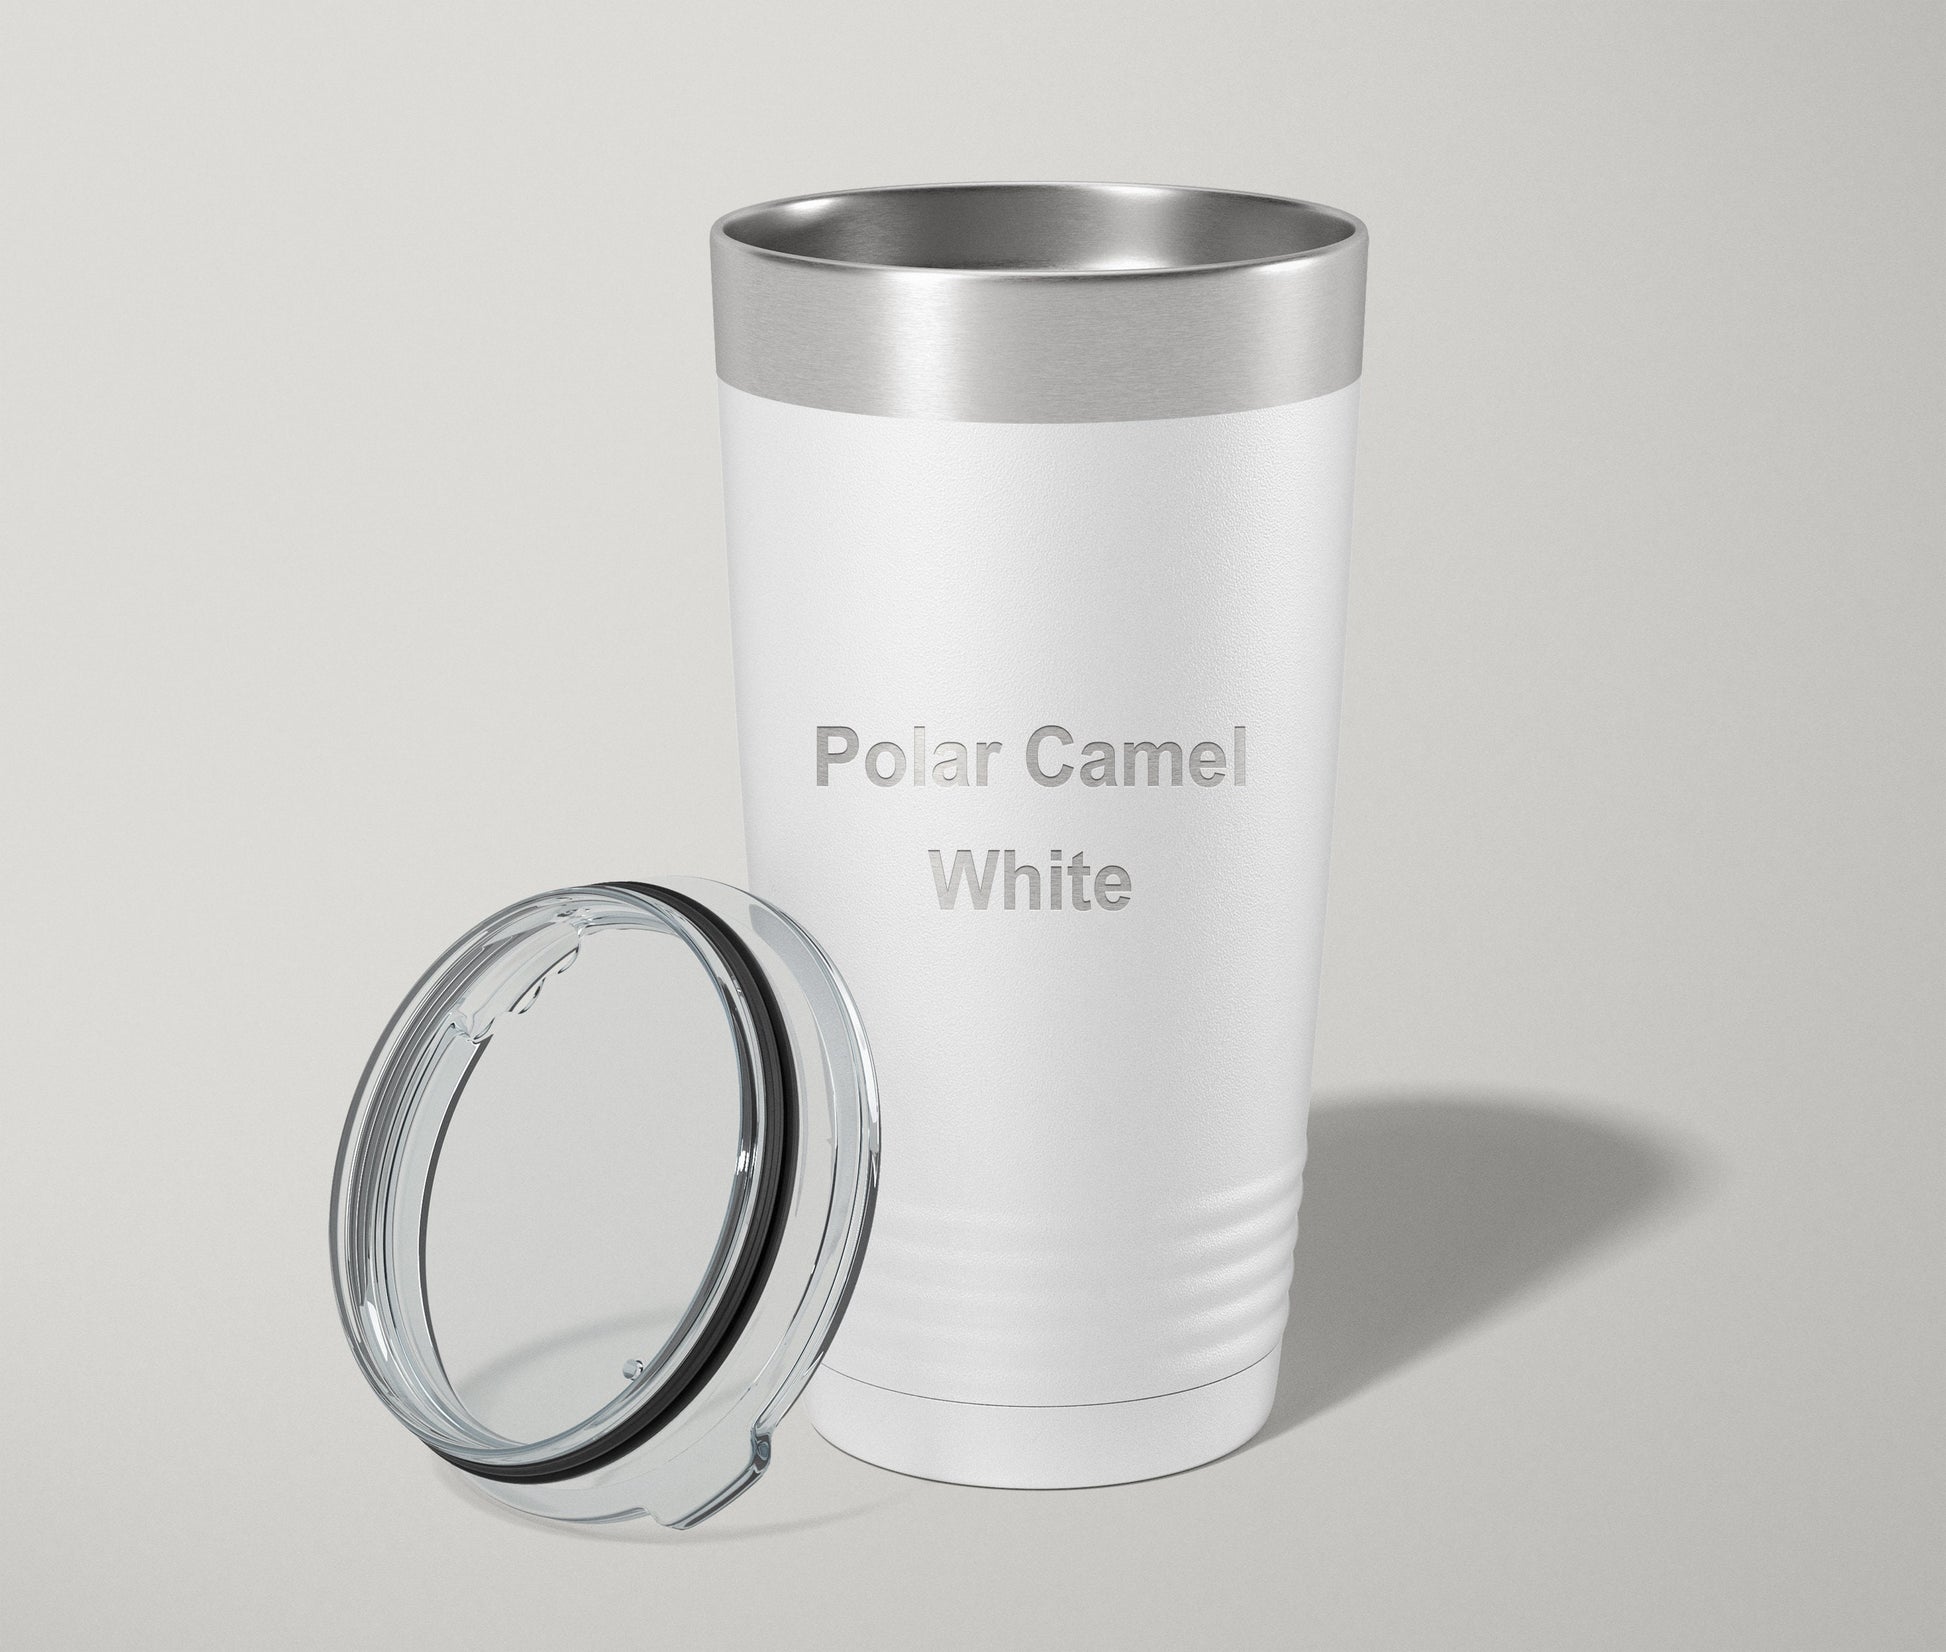 Personalized Engraved YETI® W/ Lid or Polar Camel Wine Tumbler Bridesmaid  Gift, Maid of Honor, Matron, Wedding Party, Mother of the FM1 